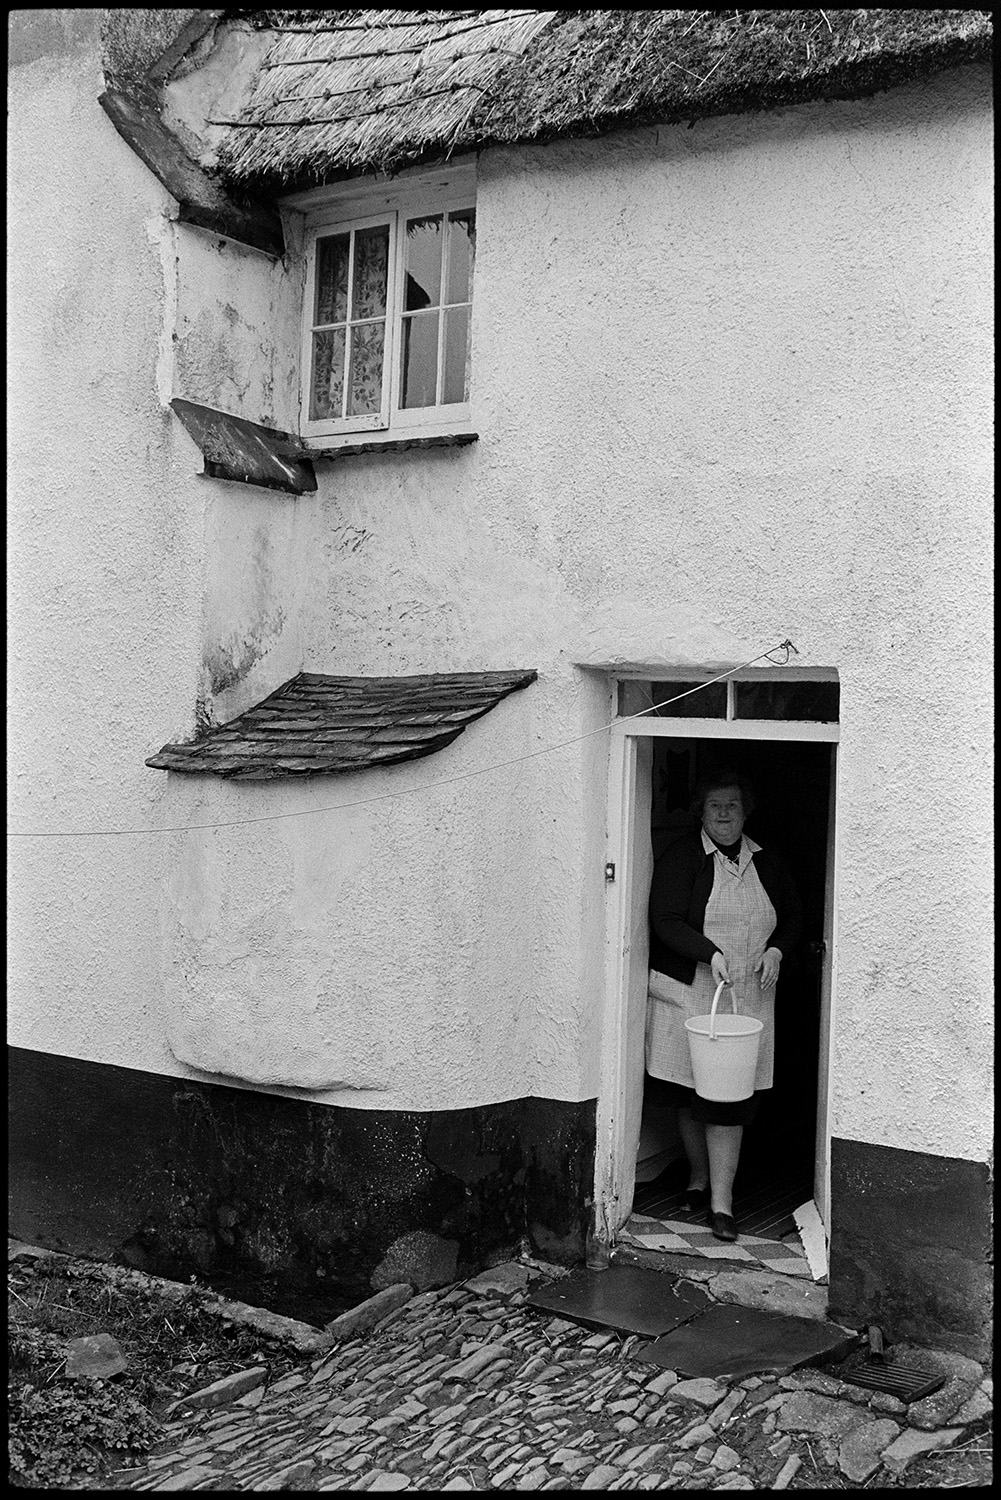 Woman pouring water down drain at back of cob and thatch cottage, see later pic ruined.
[A woman holding a bucket stepping out of the back door of a house in Beaford on to a cobbled path outside to empty the bucket. The cottage has a thatched roof and a tiled bread oven is next to the door.]